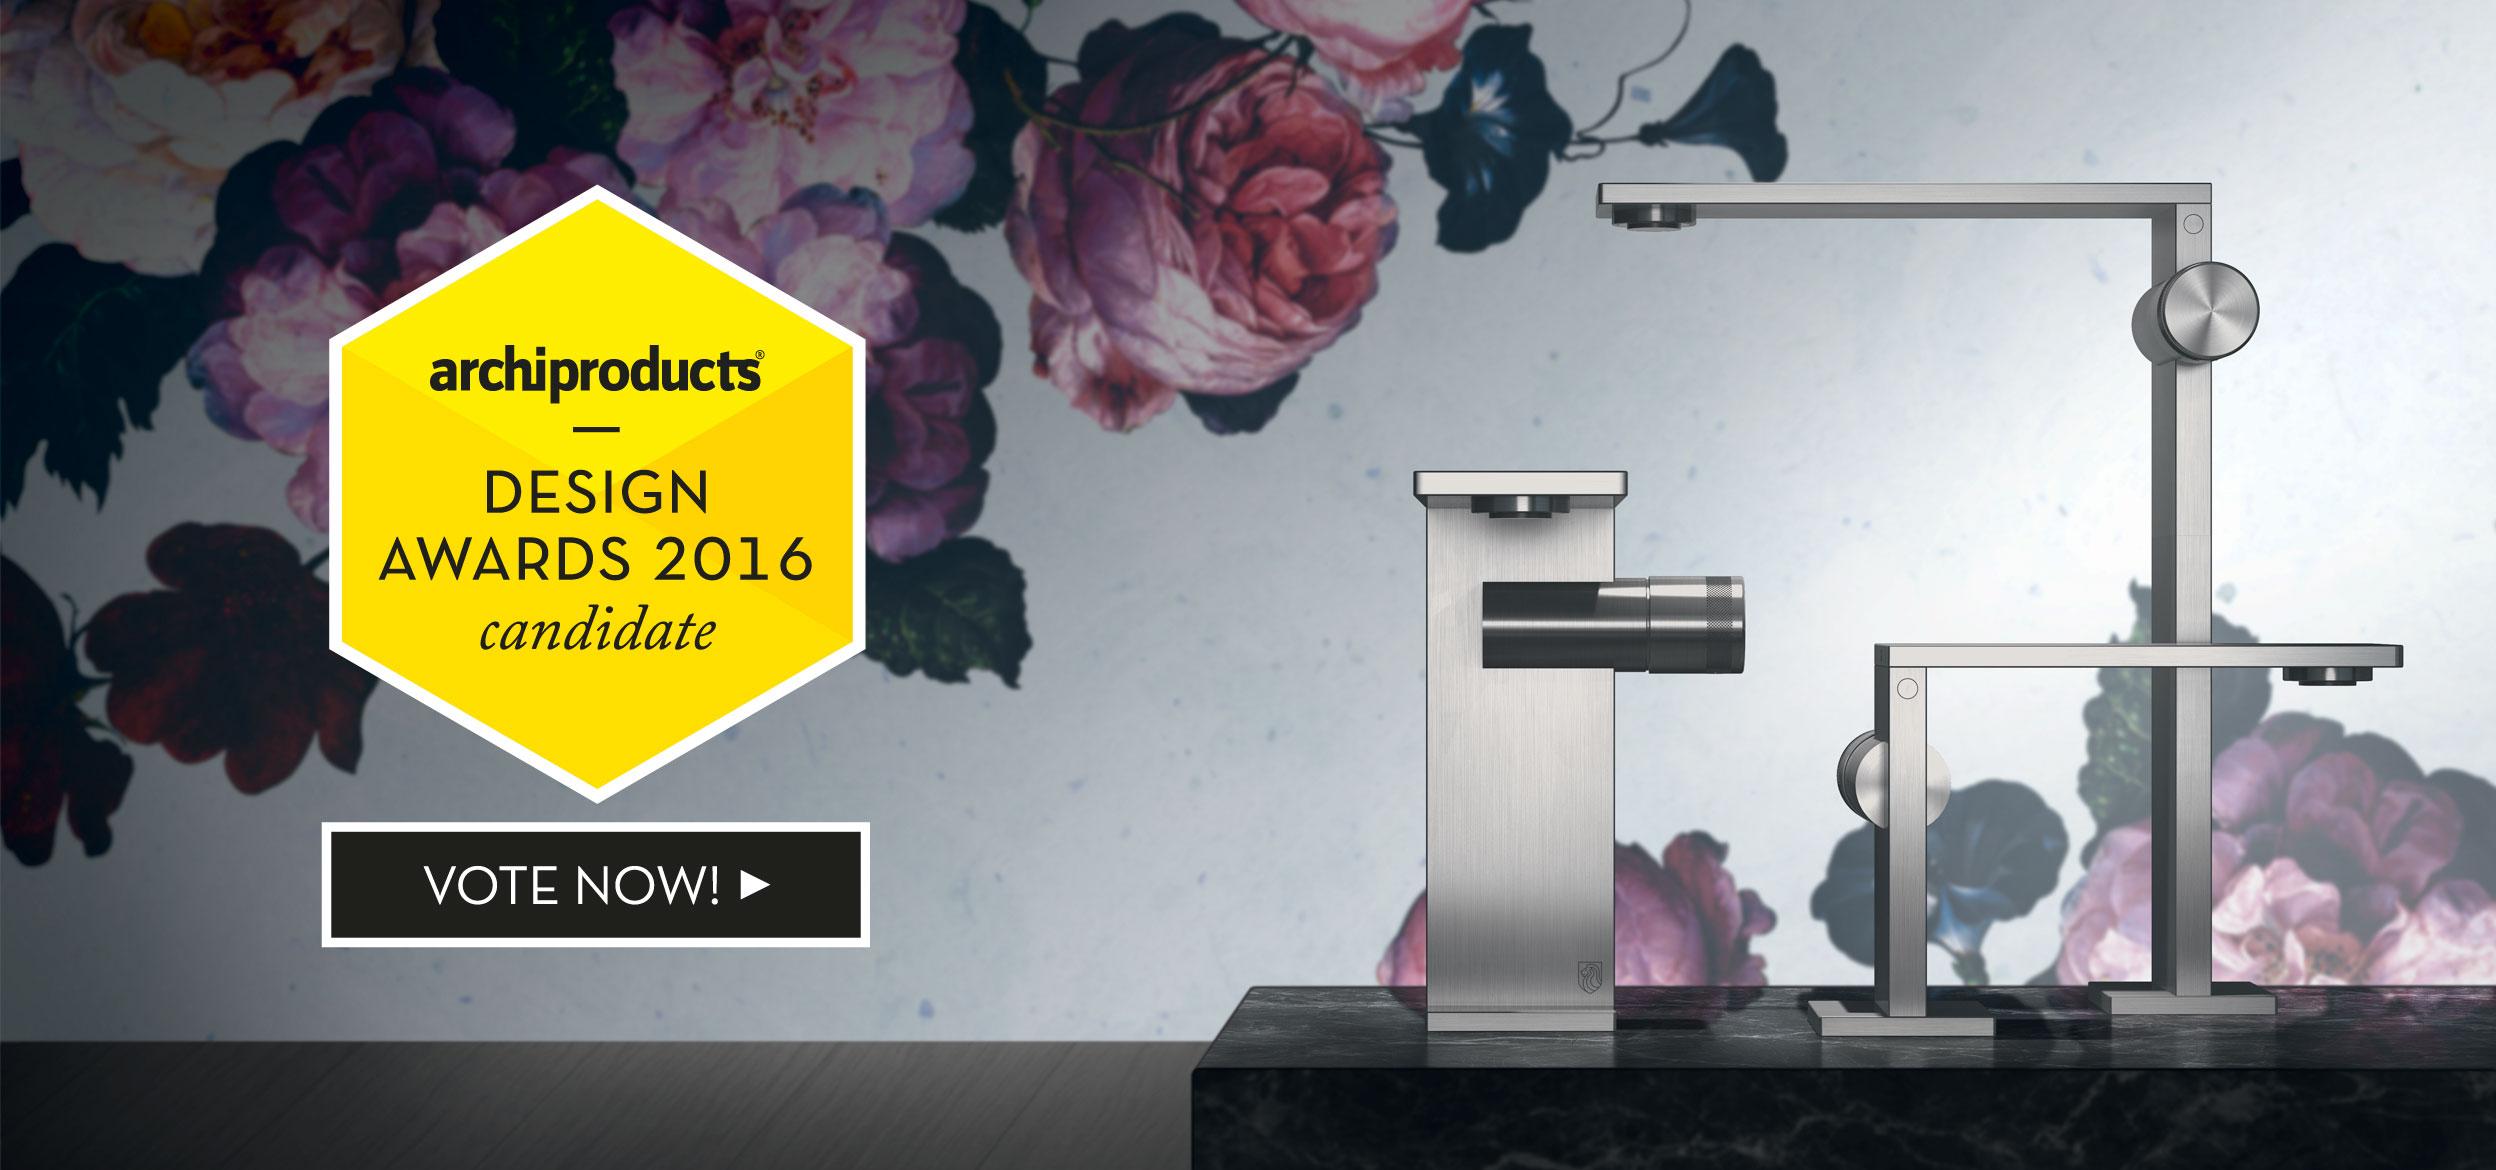 Archiproducts Design Awards 2016: are you ready to vote for Radomonte?